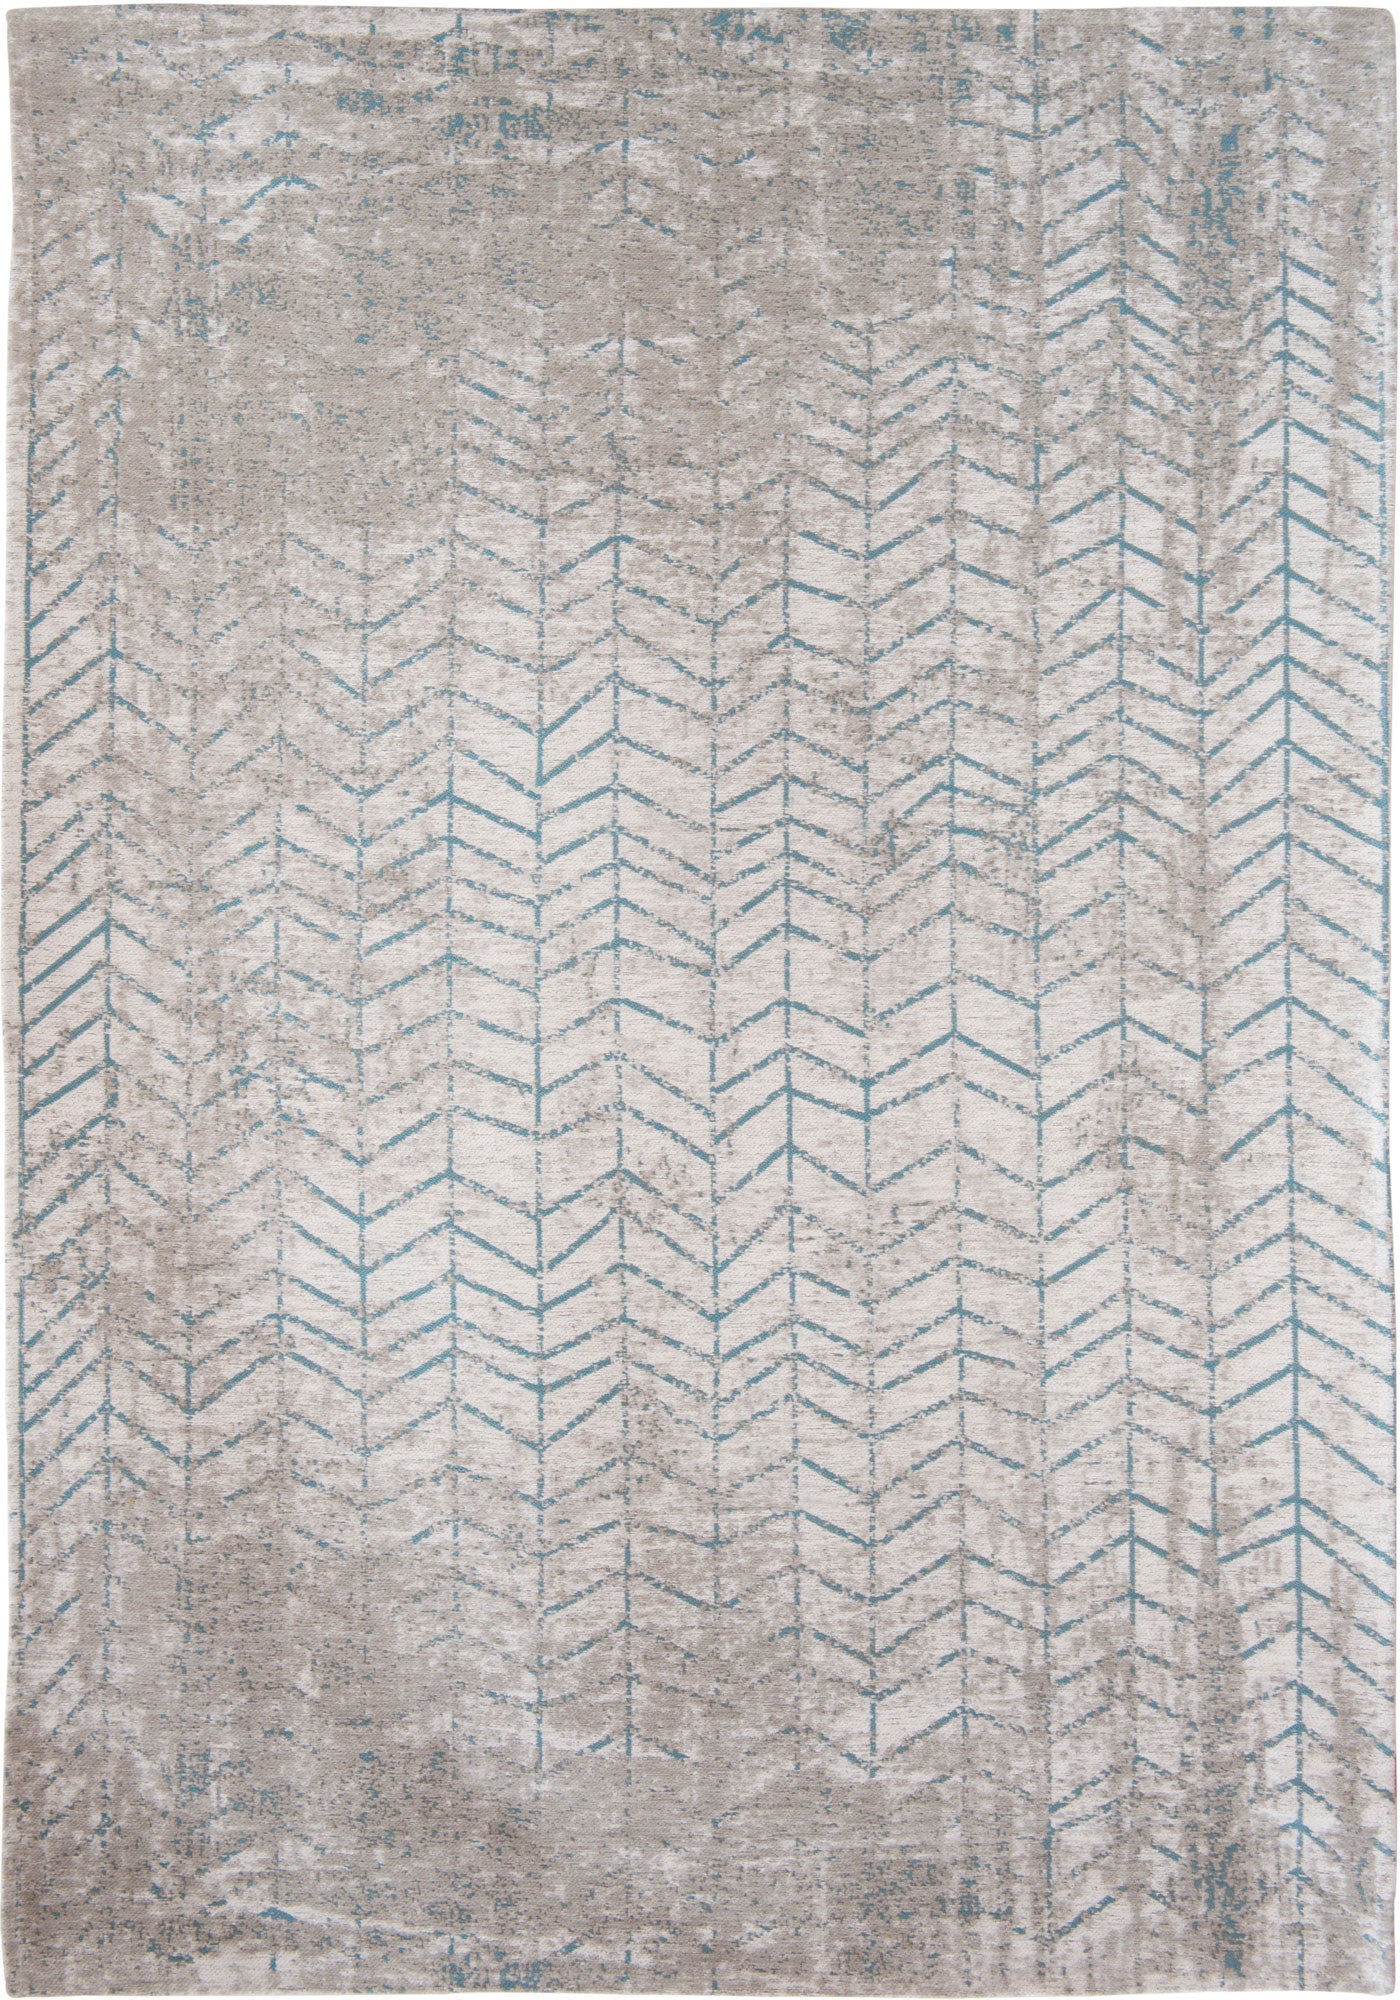 Ivory flatweave rug with faded blue chevron pattern